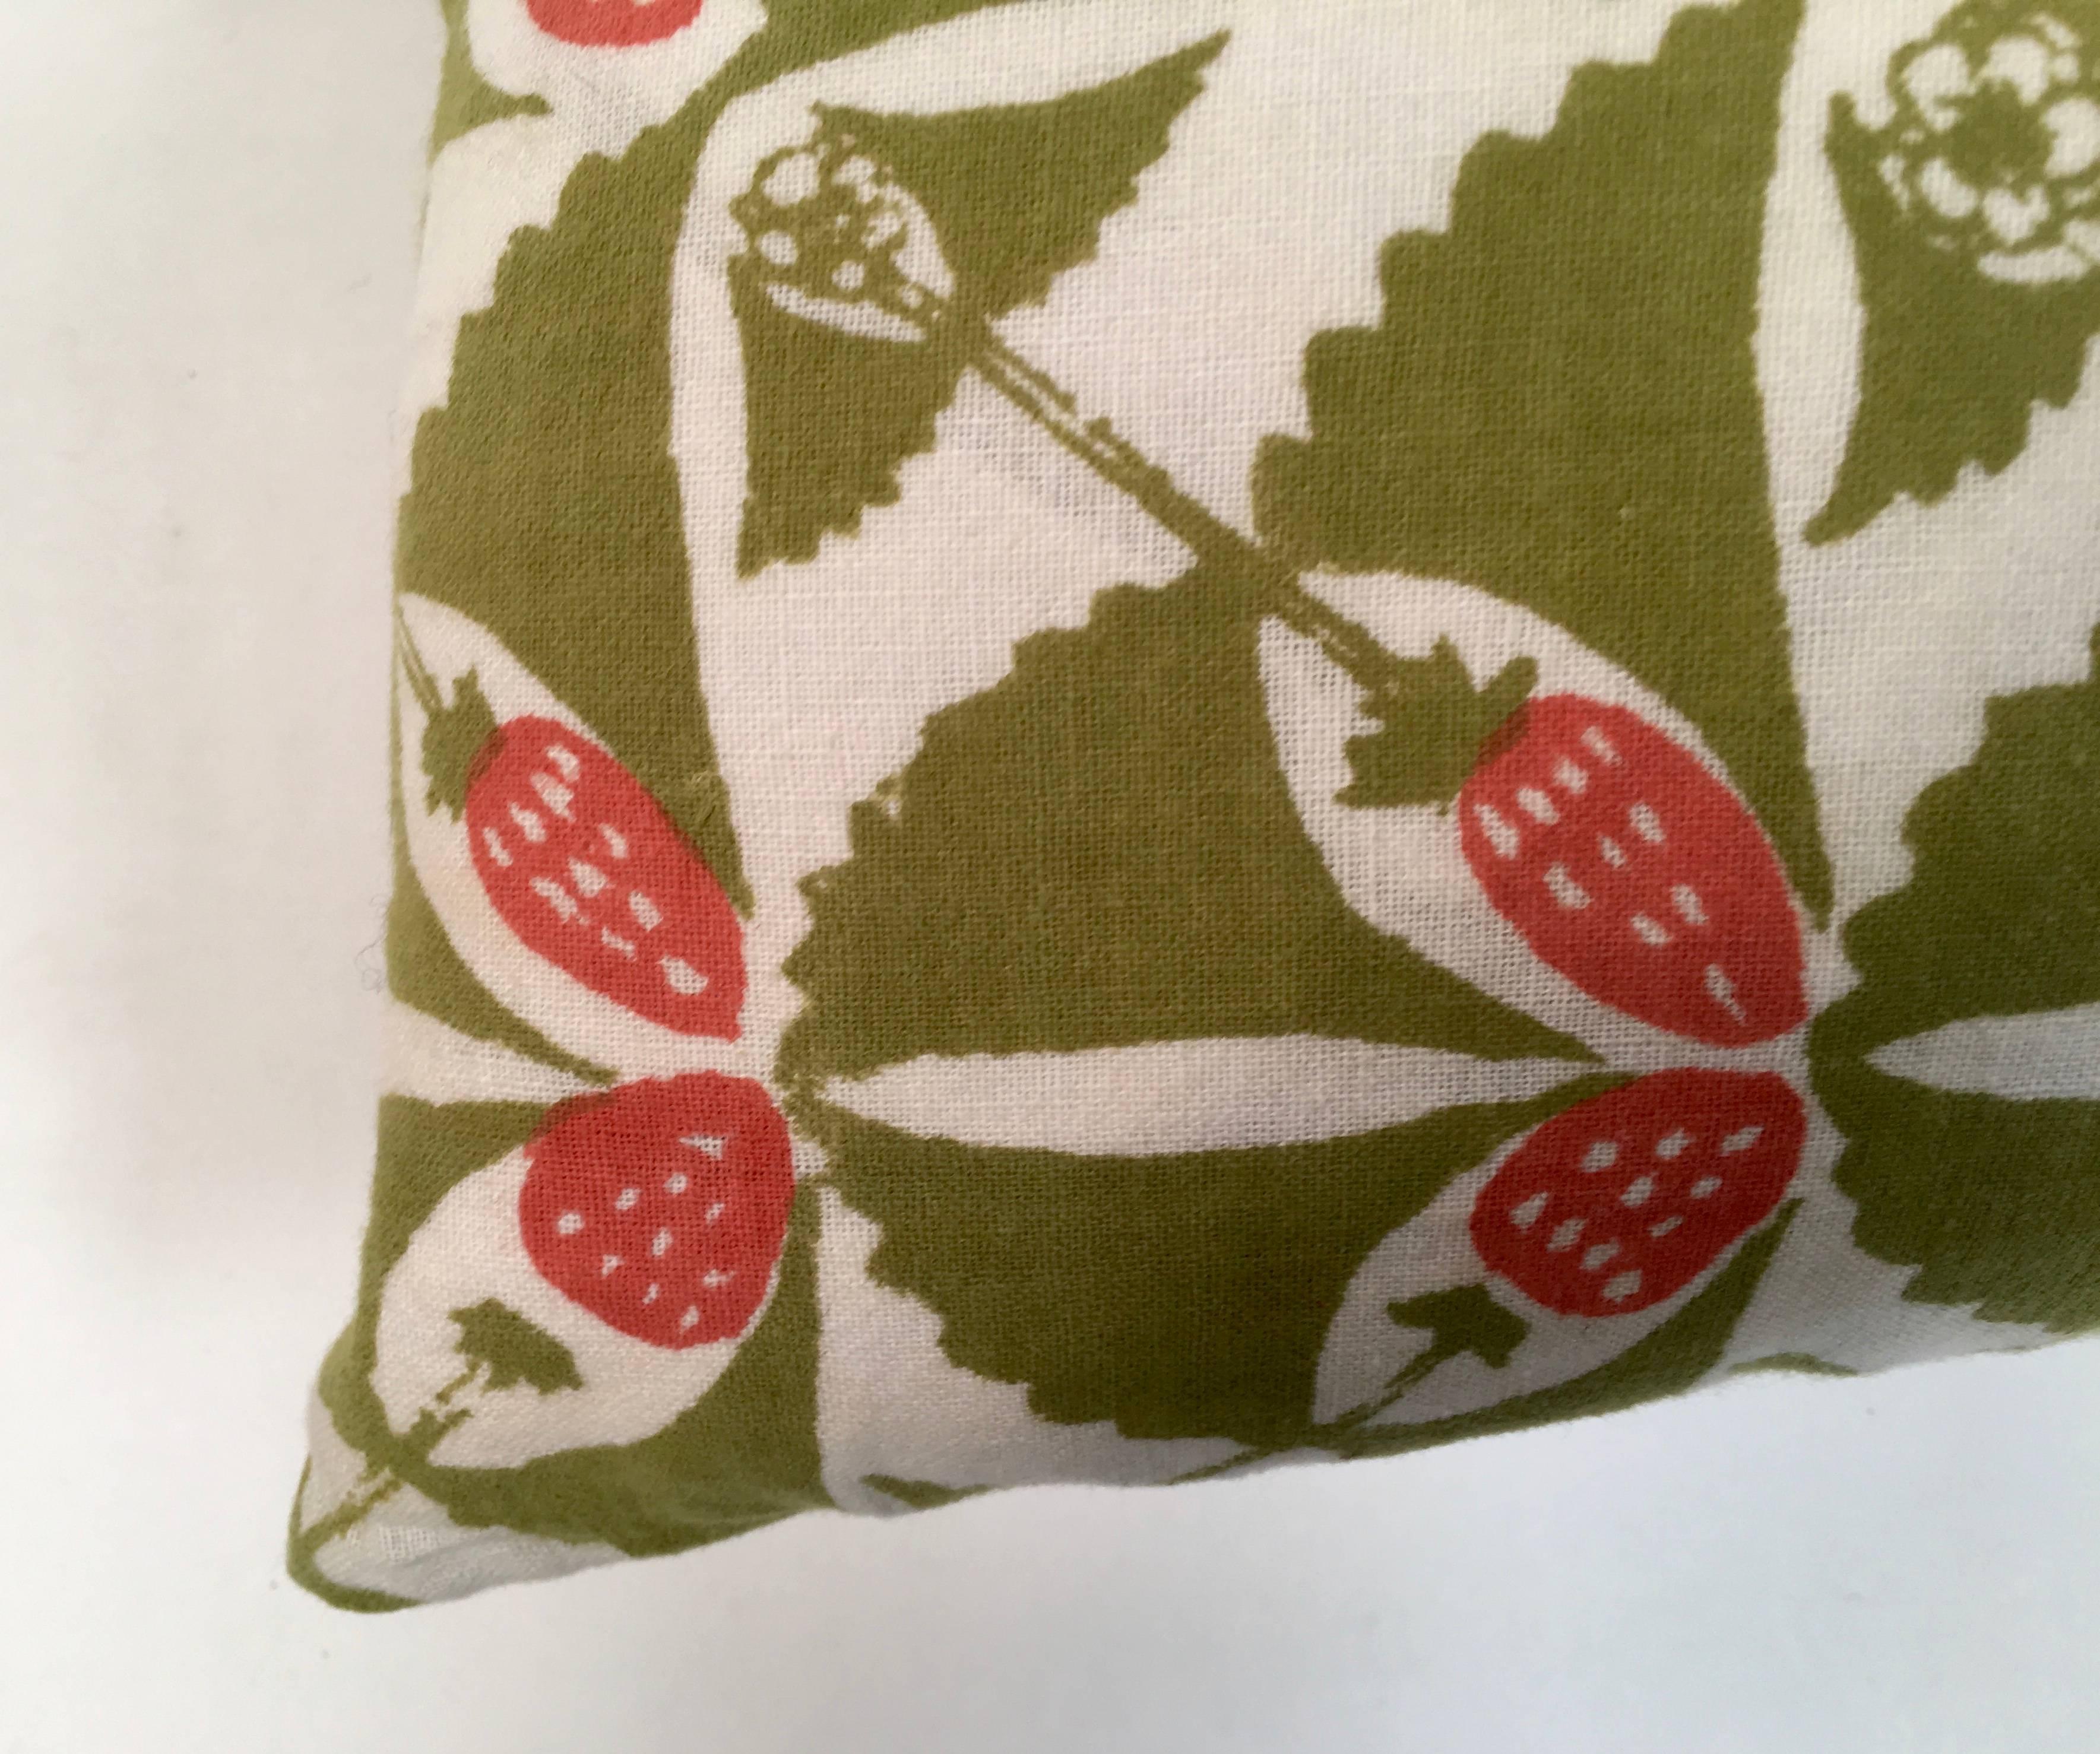 American Hand Block Printed Strawberry Patch Pillow by the Folly Cove Designers